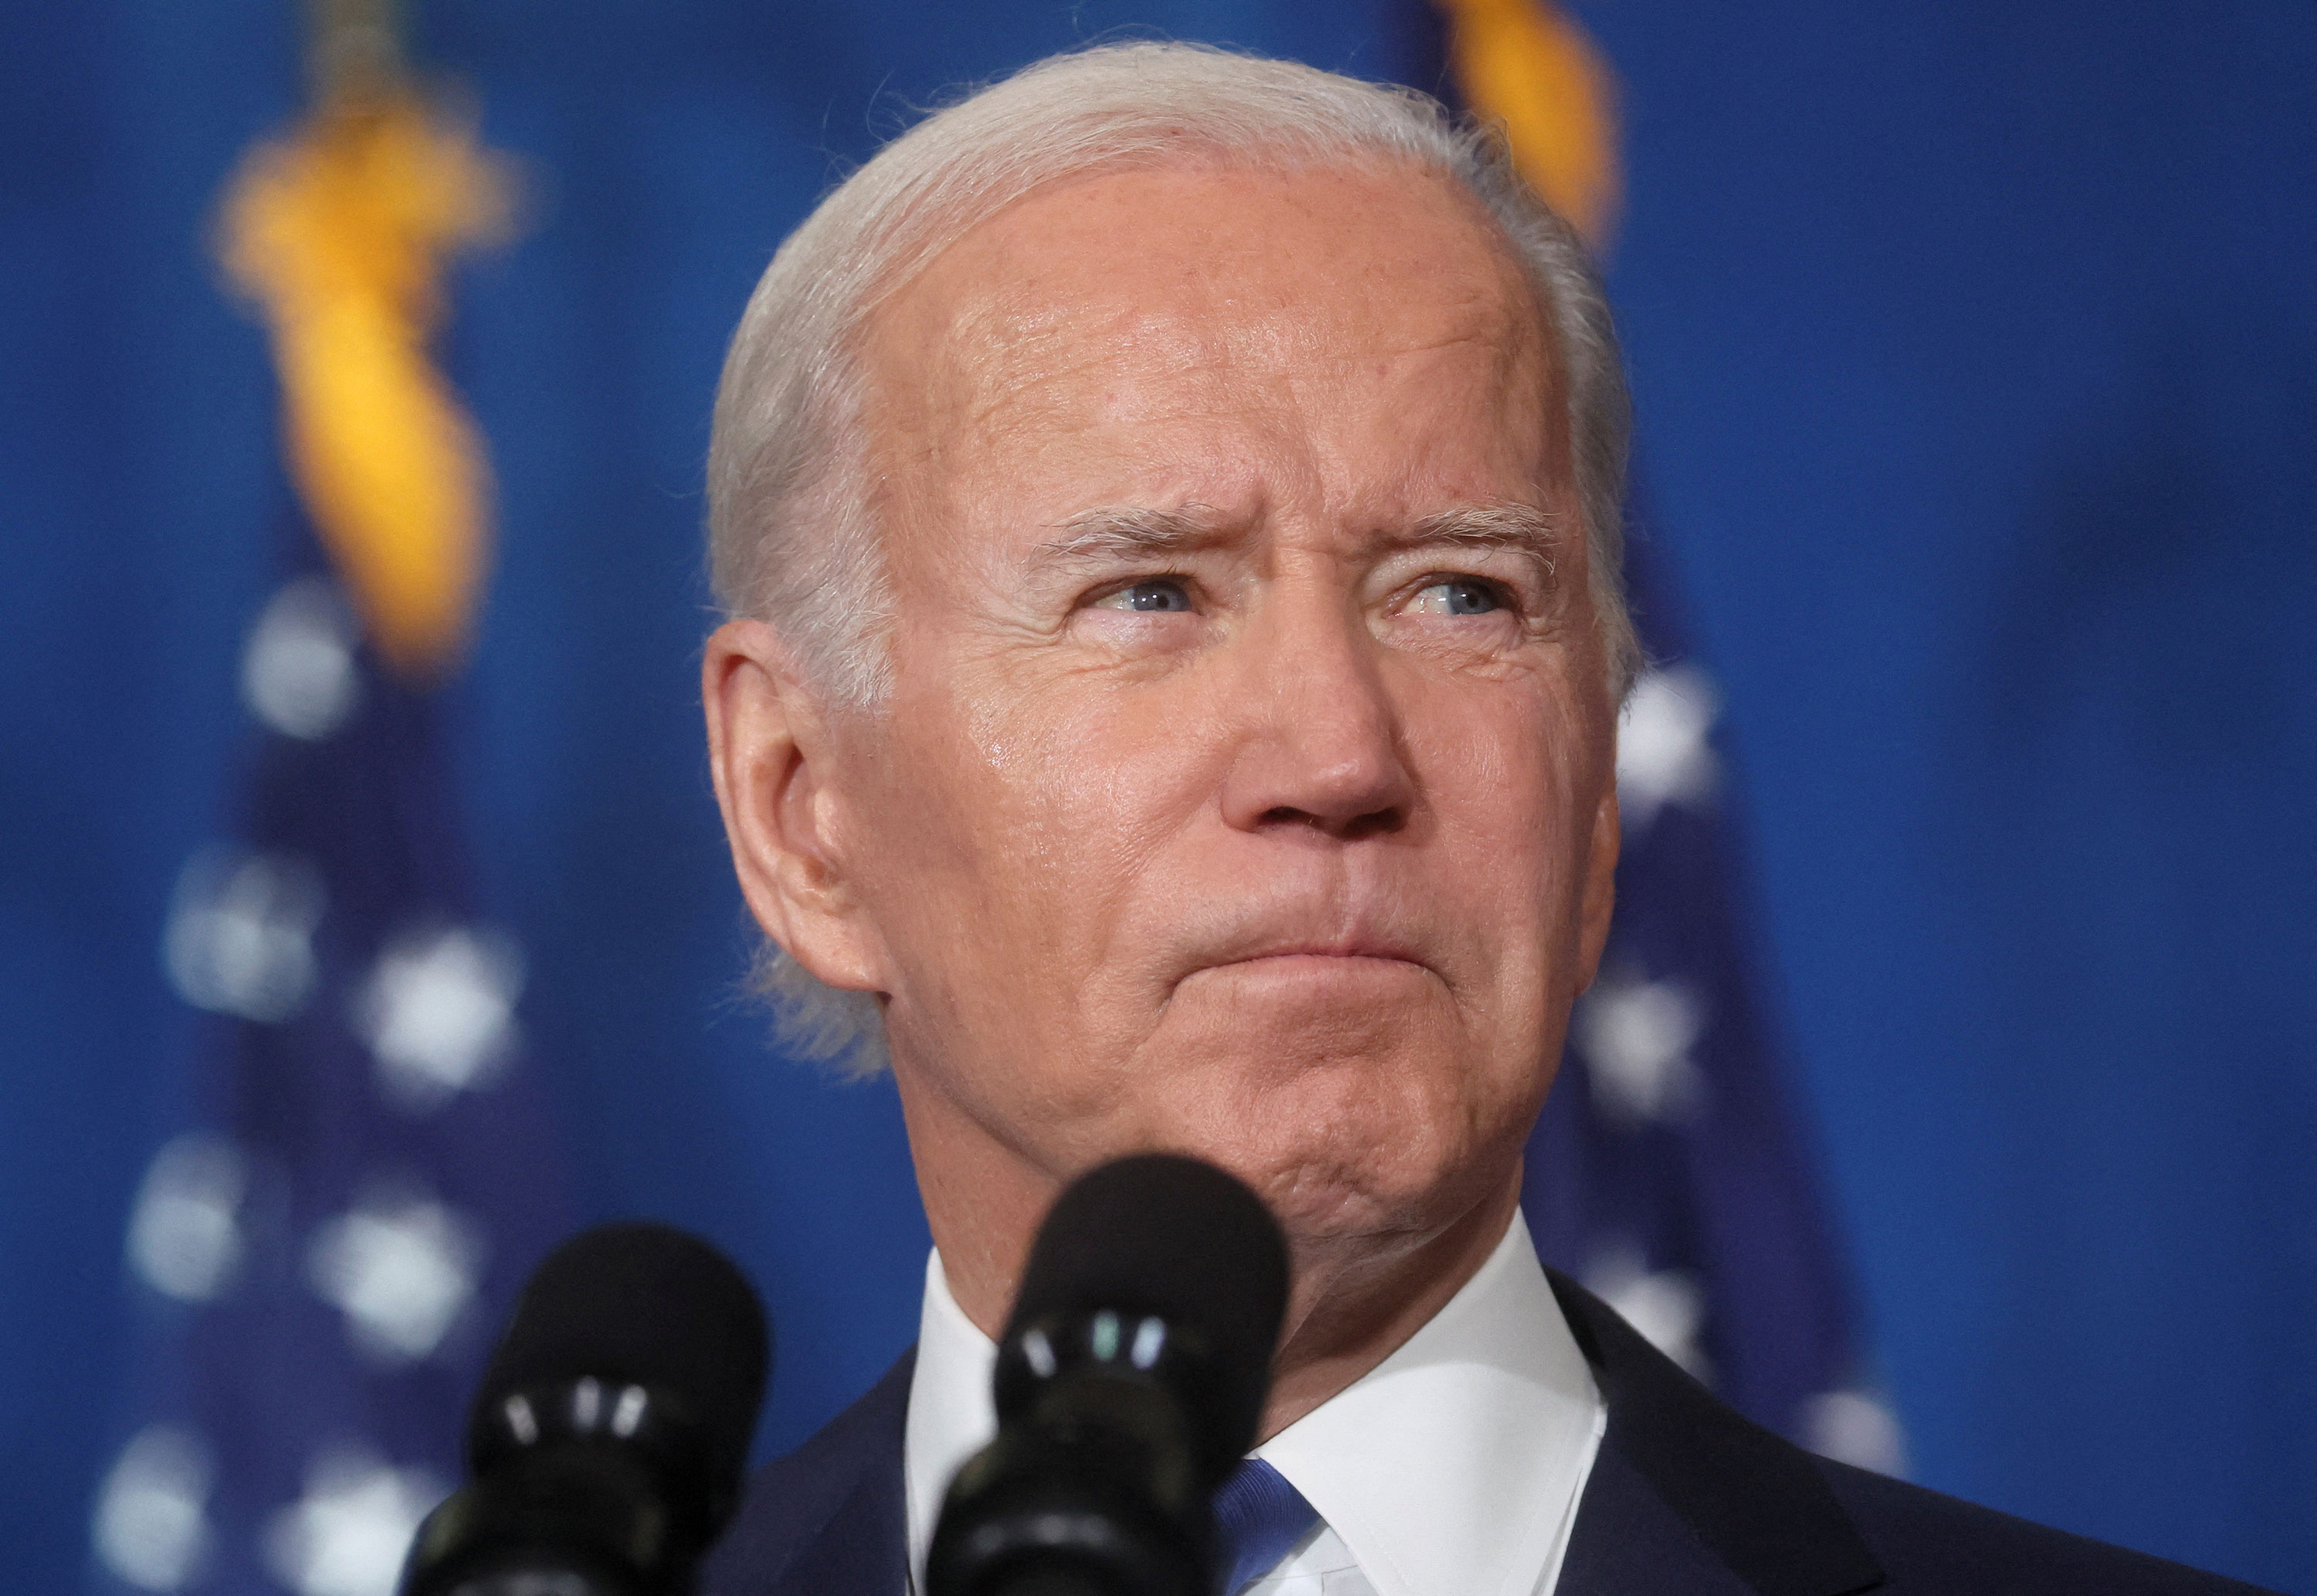 President Joe Biden speaks during a Democratic National Committee event in Washington, DC, on Wednesday.